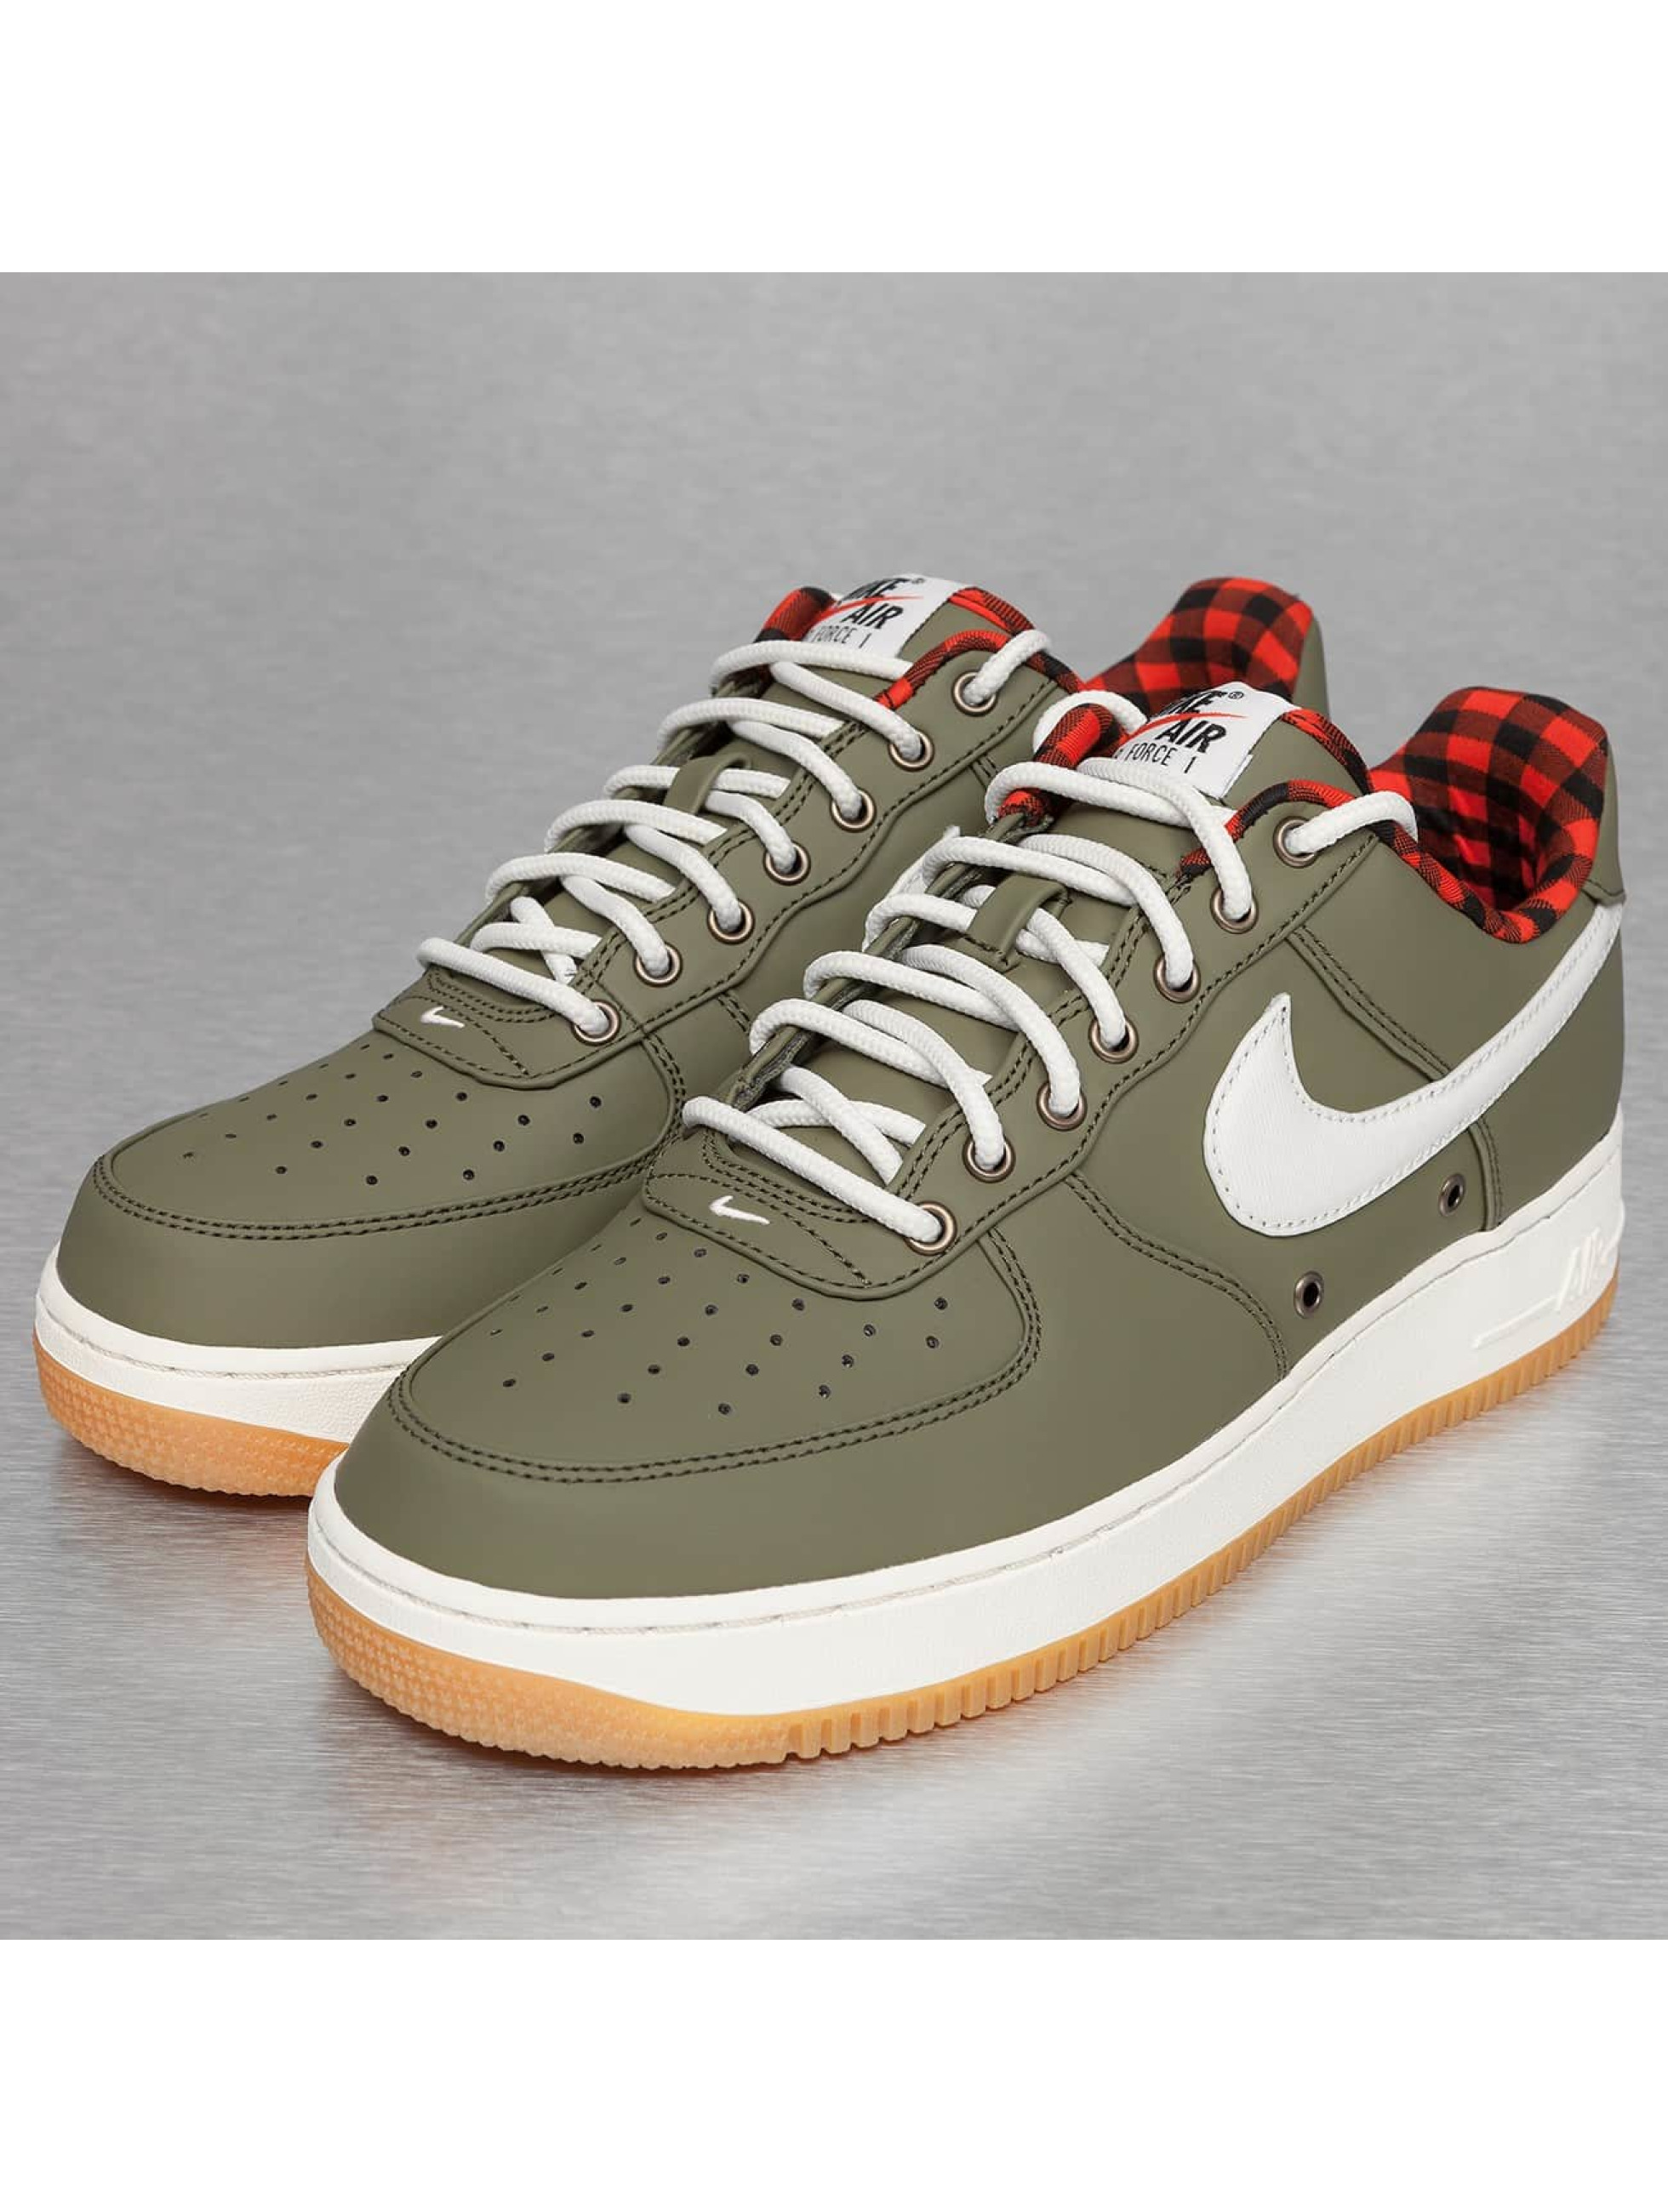 Nike Chaussures / Baskets Air Force 1 '07 LV8 en olive